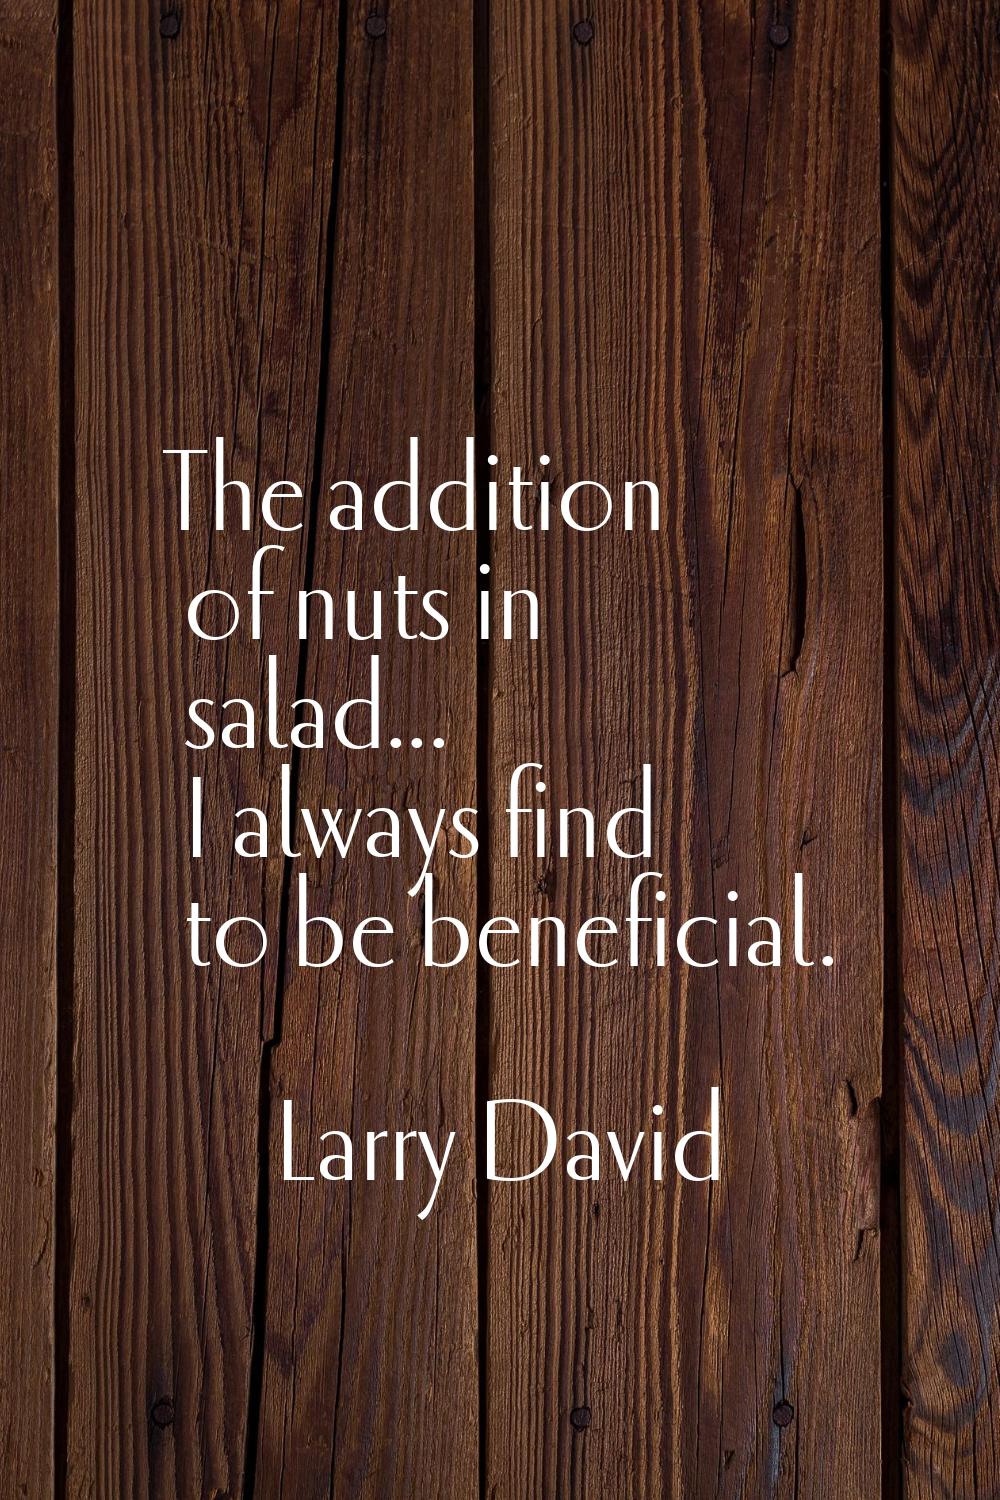 The addition of nuts in salad... I always find to be beneficial.